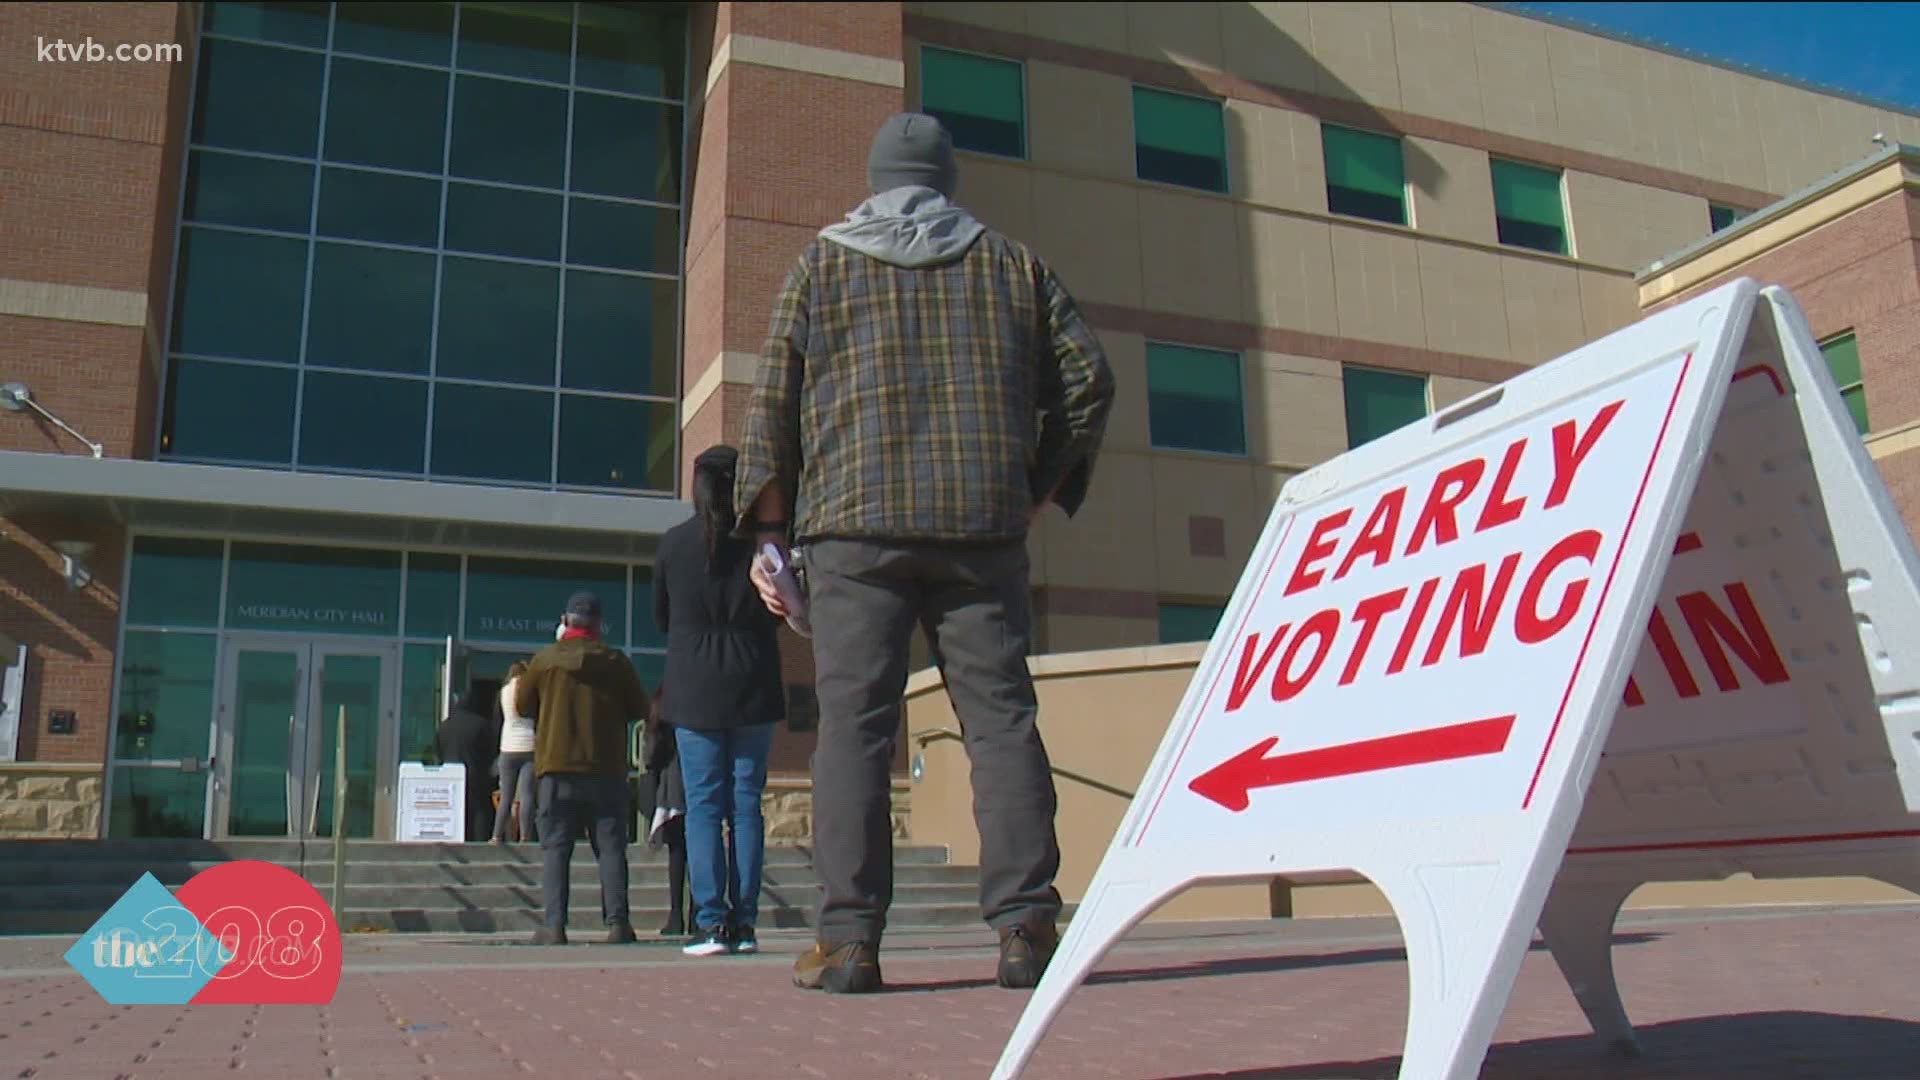 One viewer wanted to know what steps are being taken to keep voters safe at the polls.